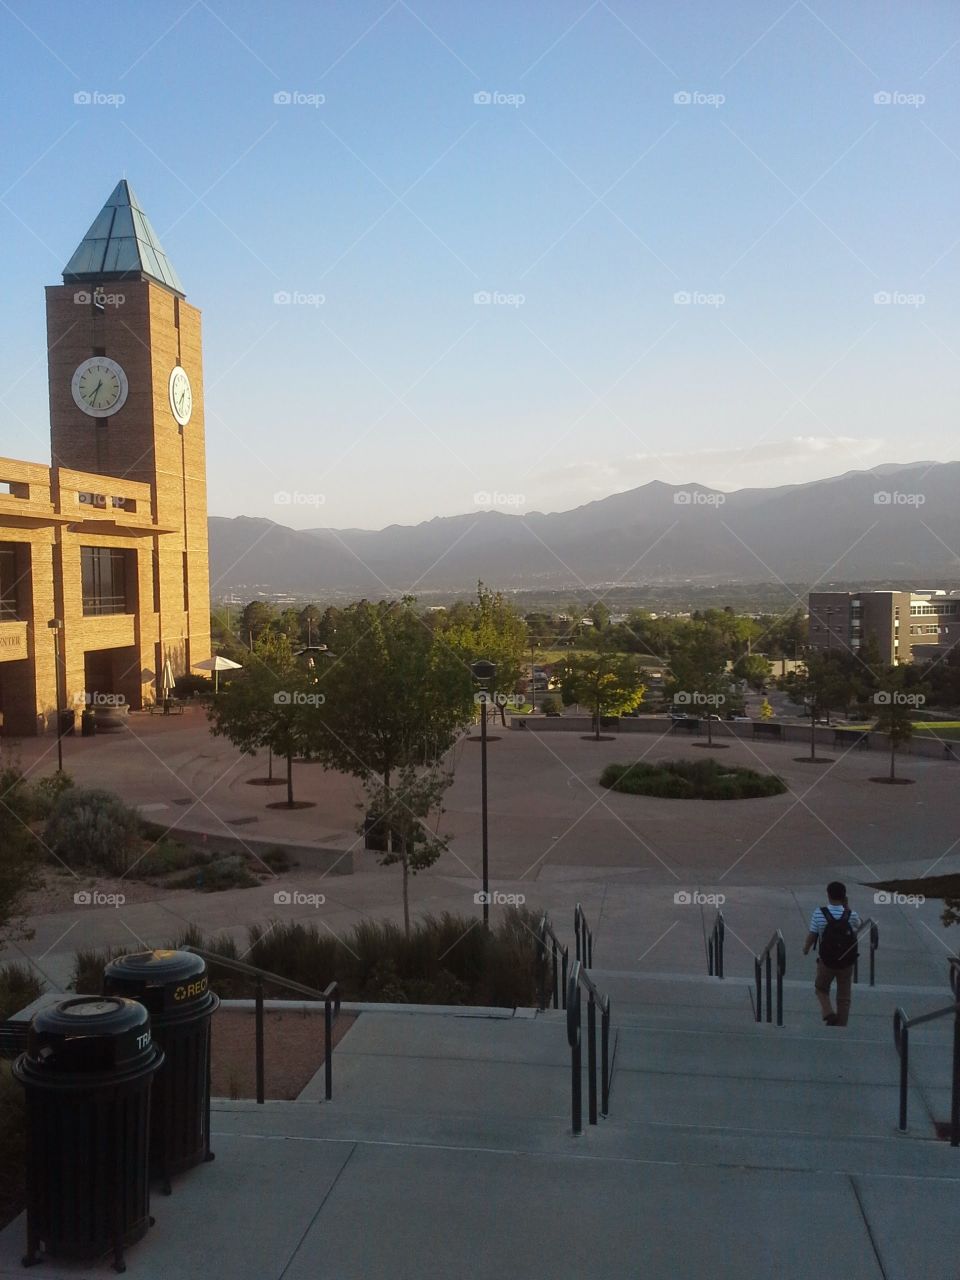 UCCS - the Rocky mountain campus. My beautiful university in the lovely setting sun. 